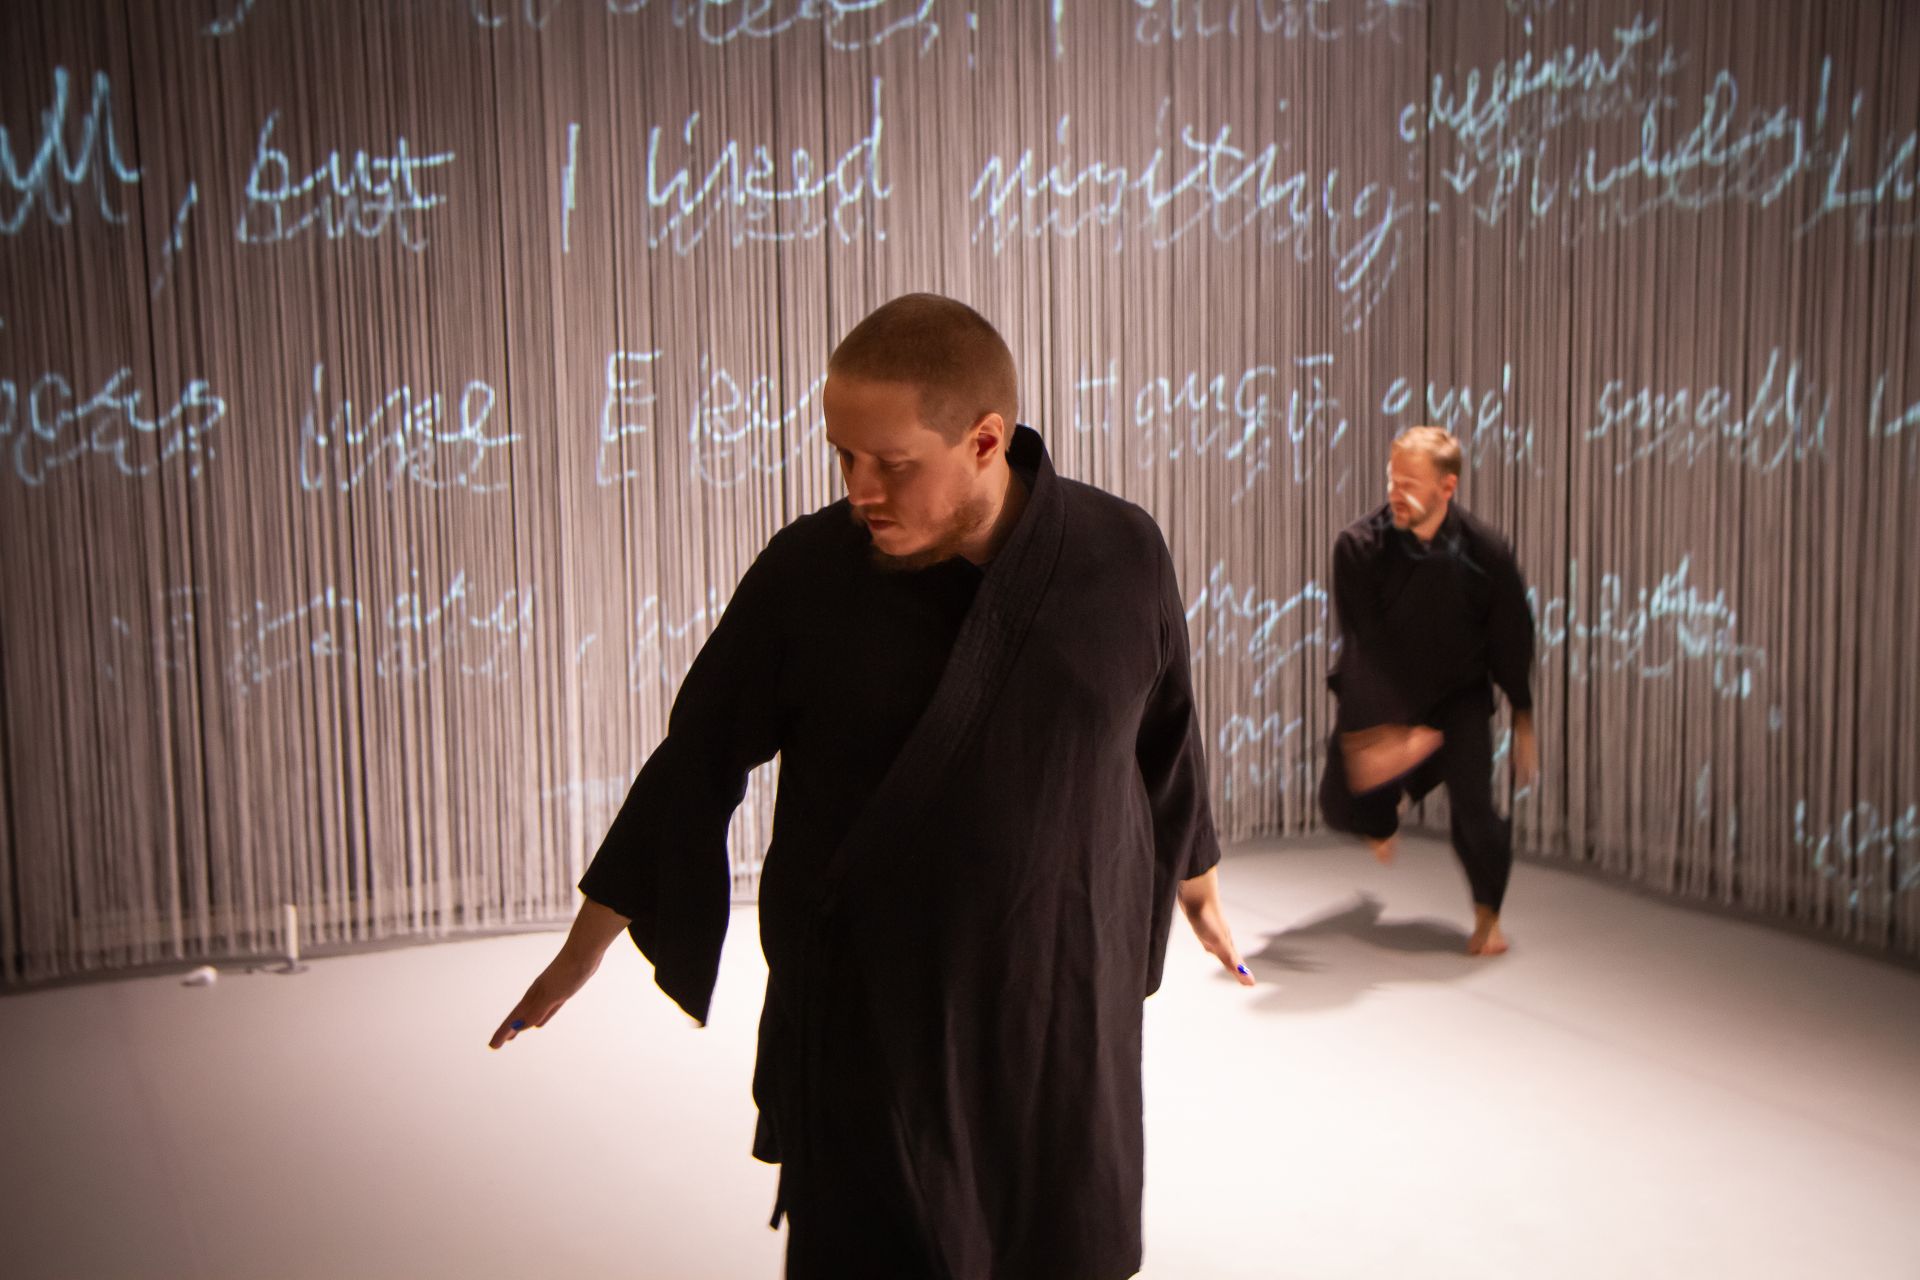 DuvTeatern dancer Emil Nordman stands in the foreground wearing a black kimono, dancing and looking down at the ground. In the background, dancer Eero Vesterinen dances in his own black kimono. The backdrop reflects Emil's diary.